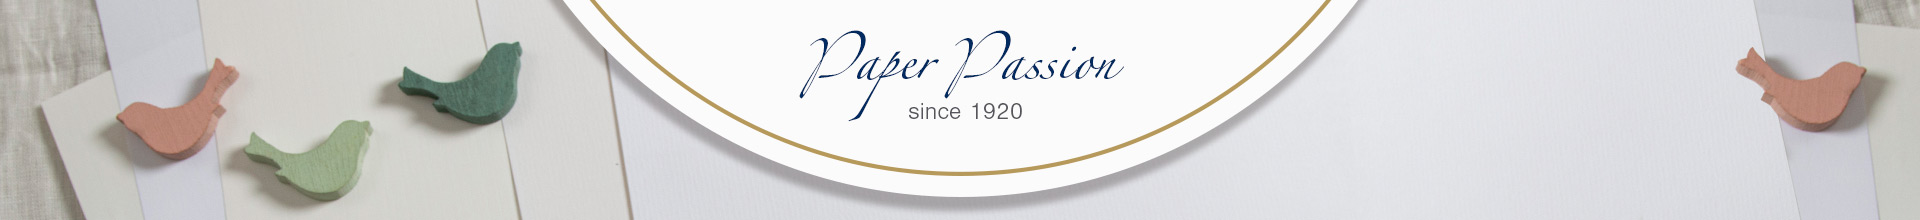 MAY+SPIES - paper passion since 1920